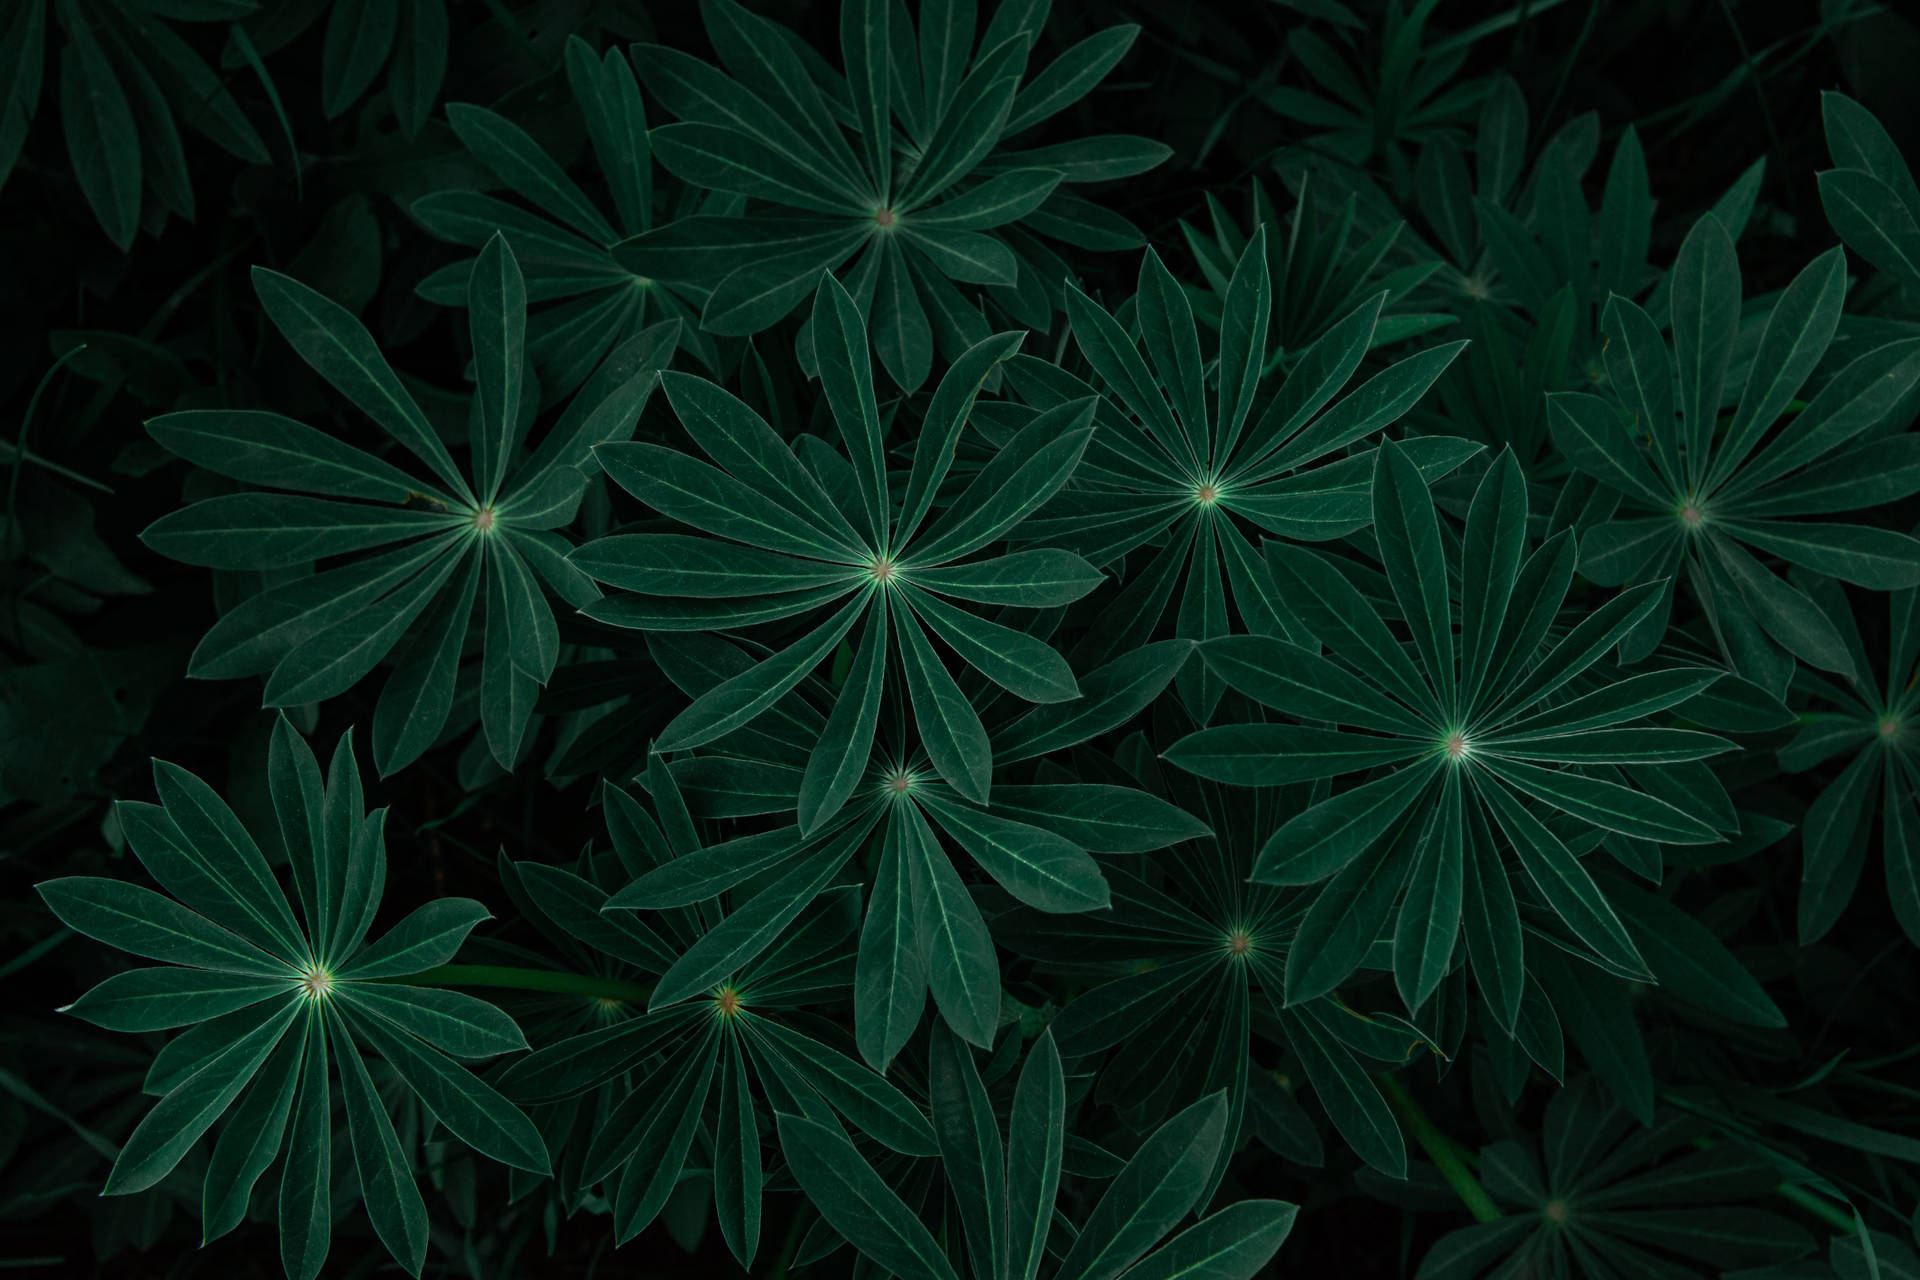 Free Green Wallpaper Downloads, [1500+] Green Wallpapers for FREE |  